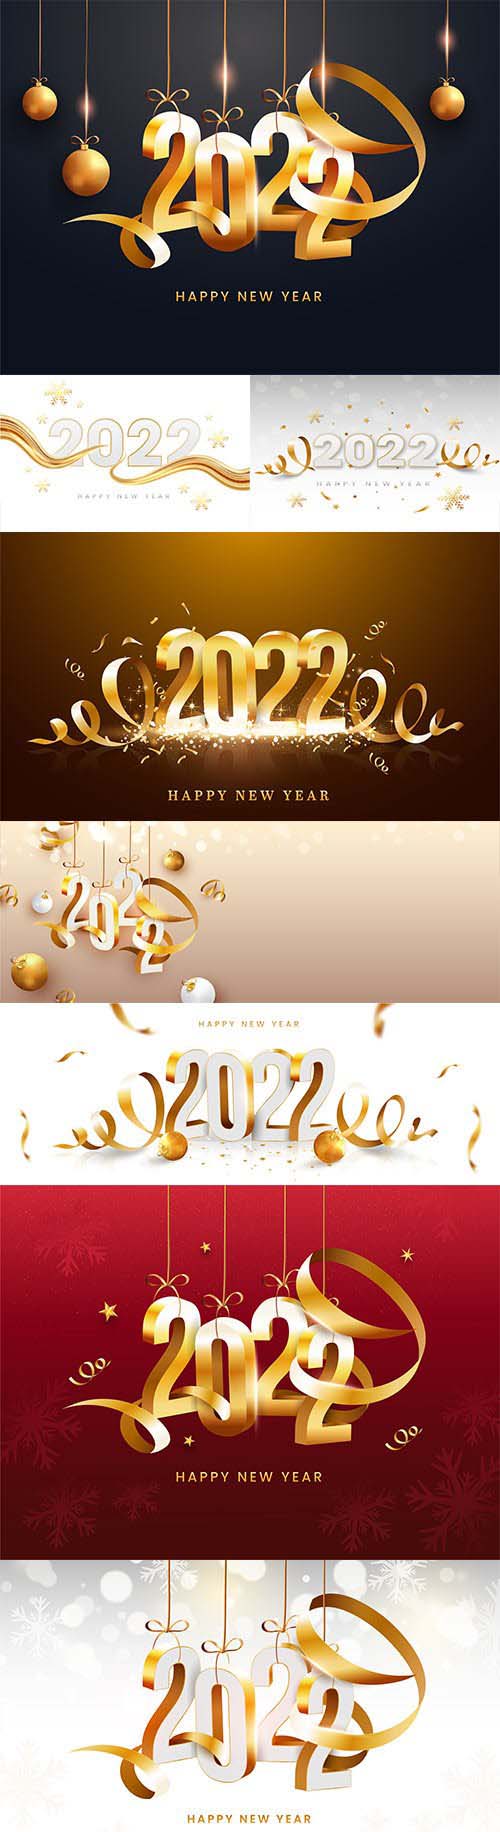 3d 2022 number hang with golden curl ribbons and baubles on peach bokeh background